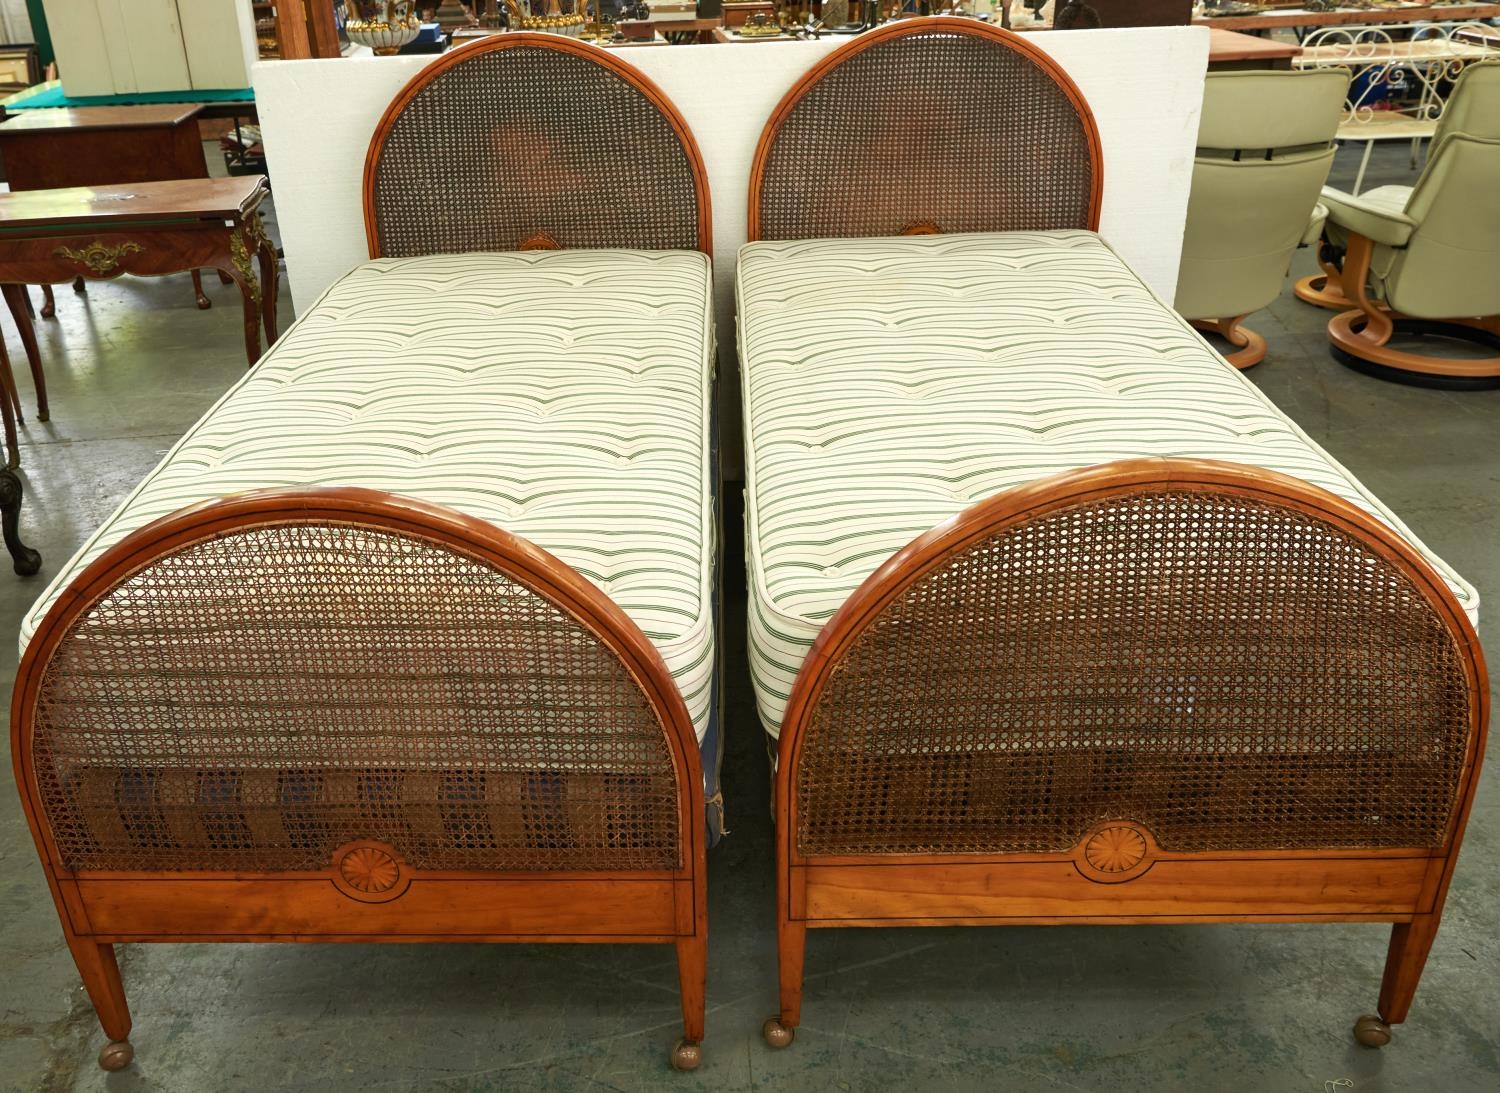 A pair of Edwardian arched and inlaid mahogany and caned single beds, c1910, with bed irons, bases